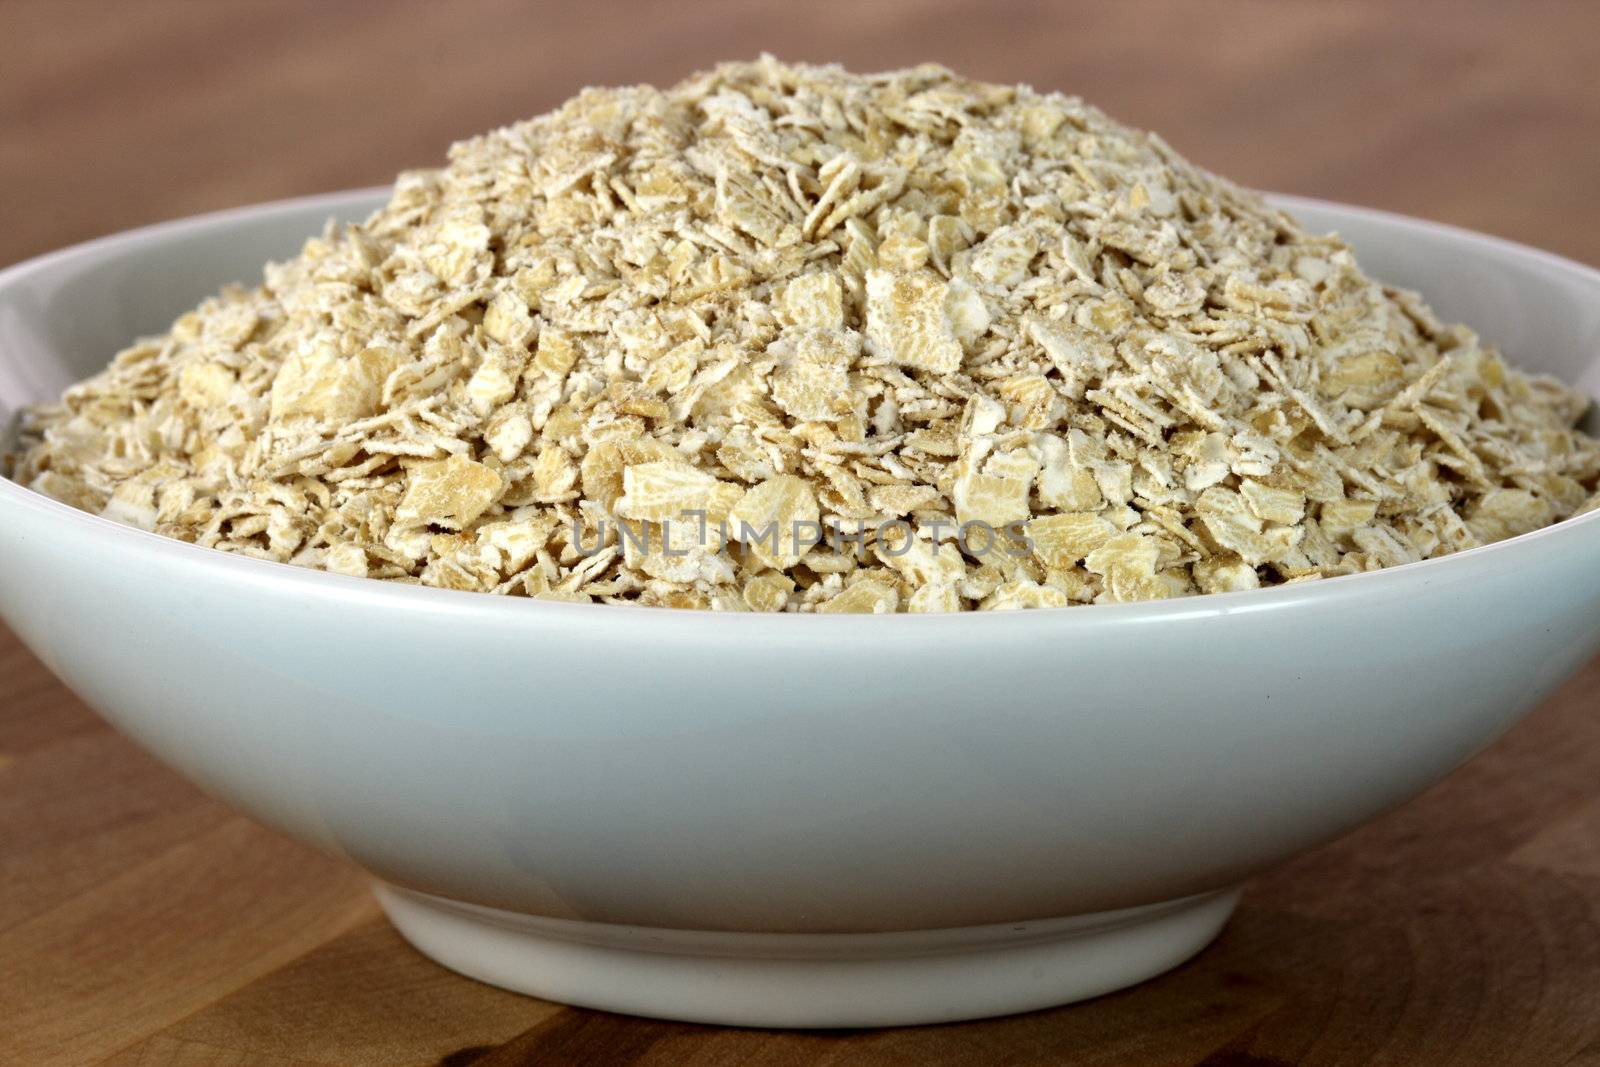 raw and healthy oat flakes a very  important part on your daily nutrition to prevent high colesterol and heart diseases